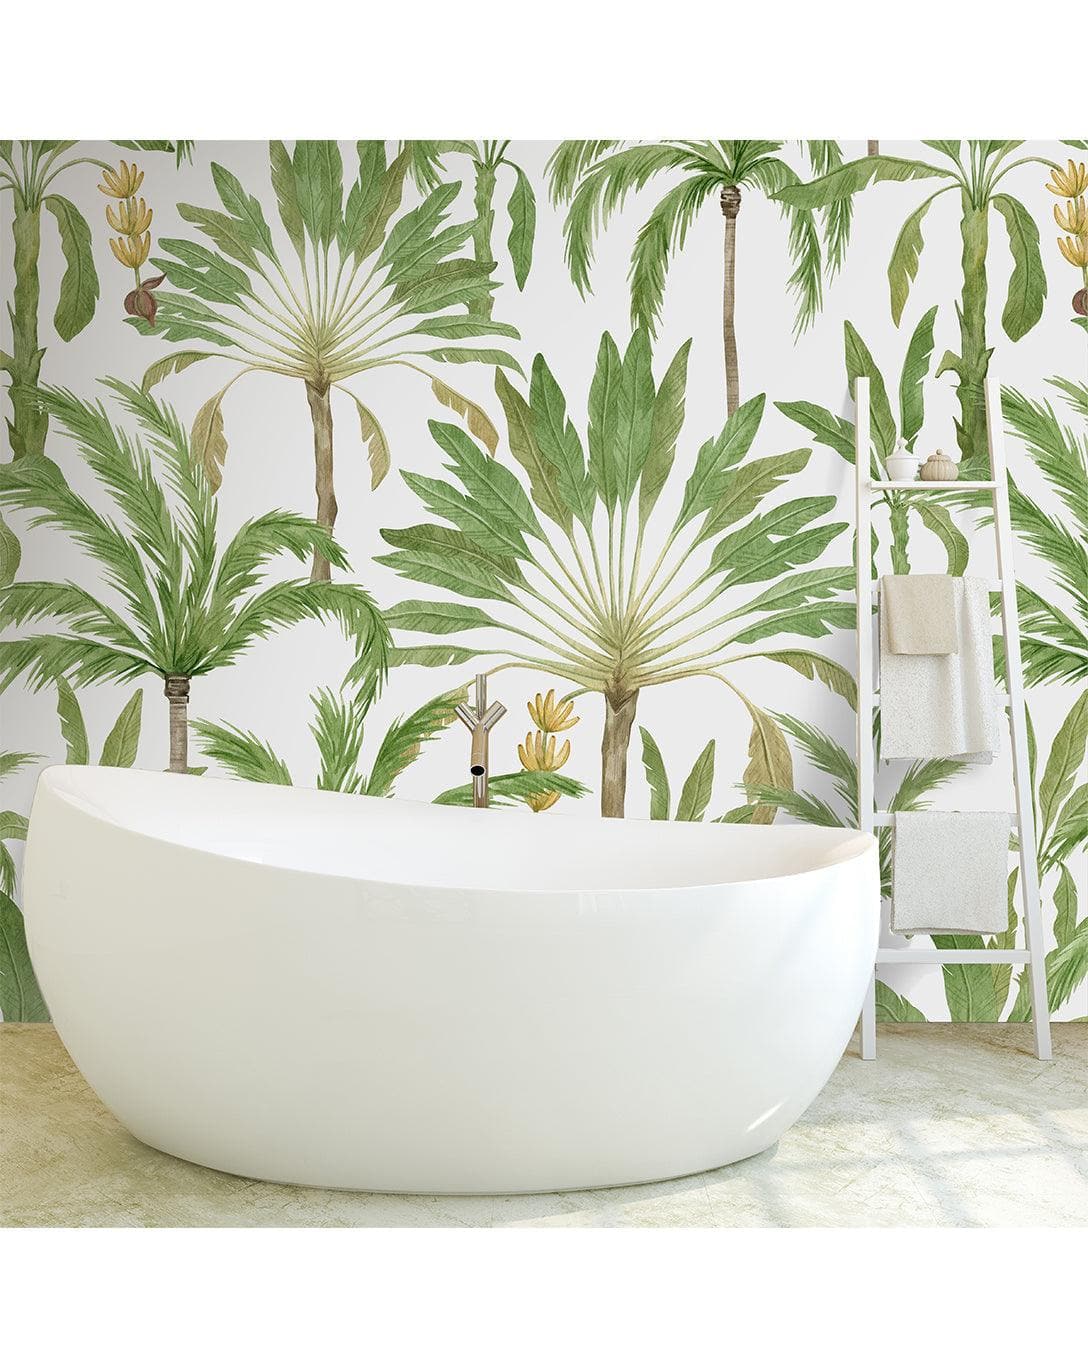 Exotic Palms Tropical Wall Mural Exotic Palms Tropical Wall Mural Exotic Palms Tropical Wall Mural 